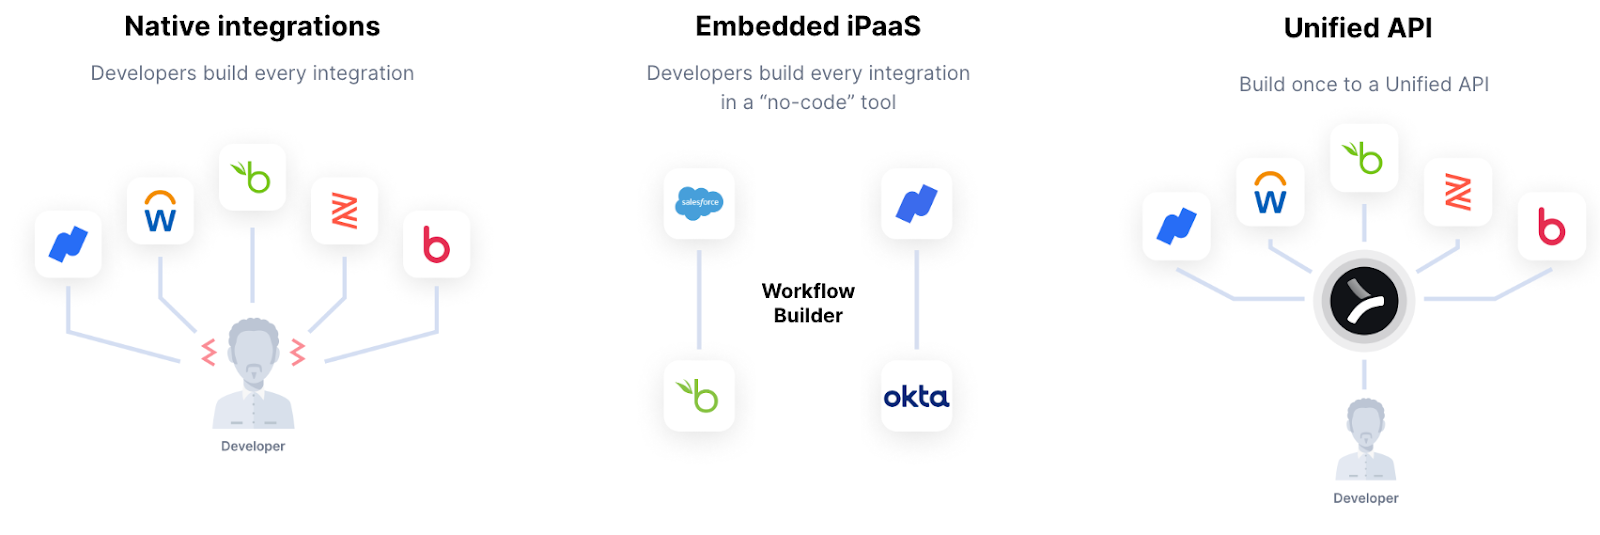 Approaches to building product integrations